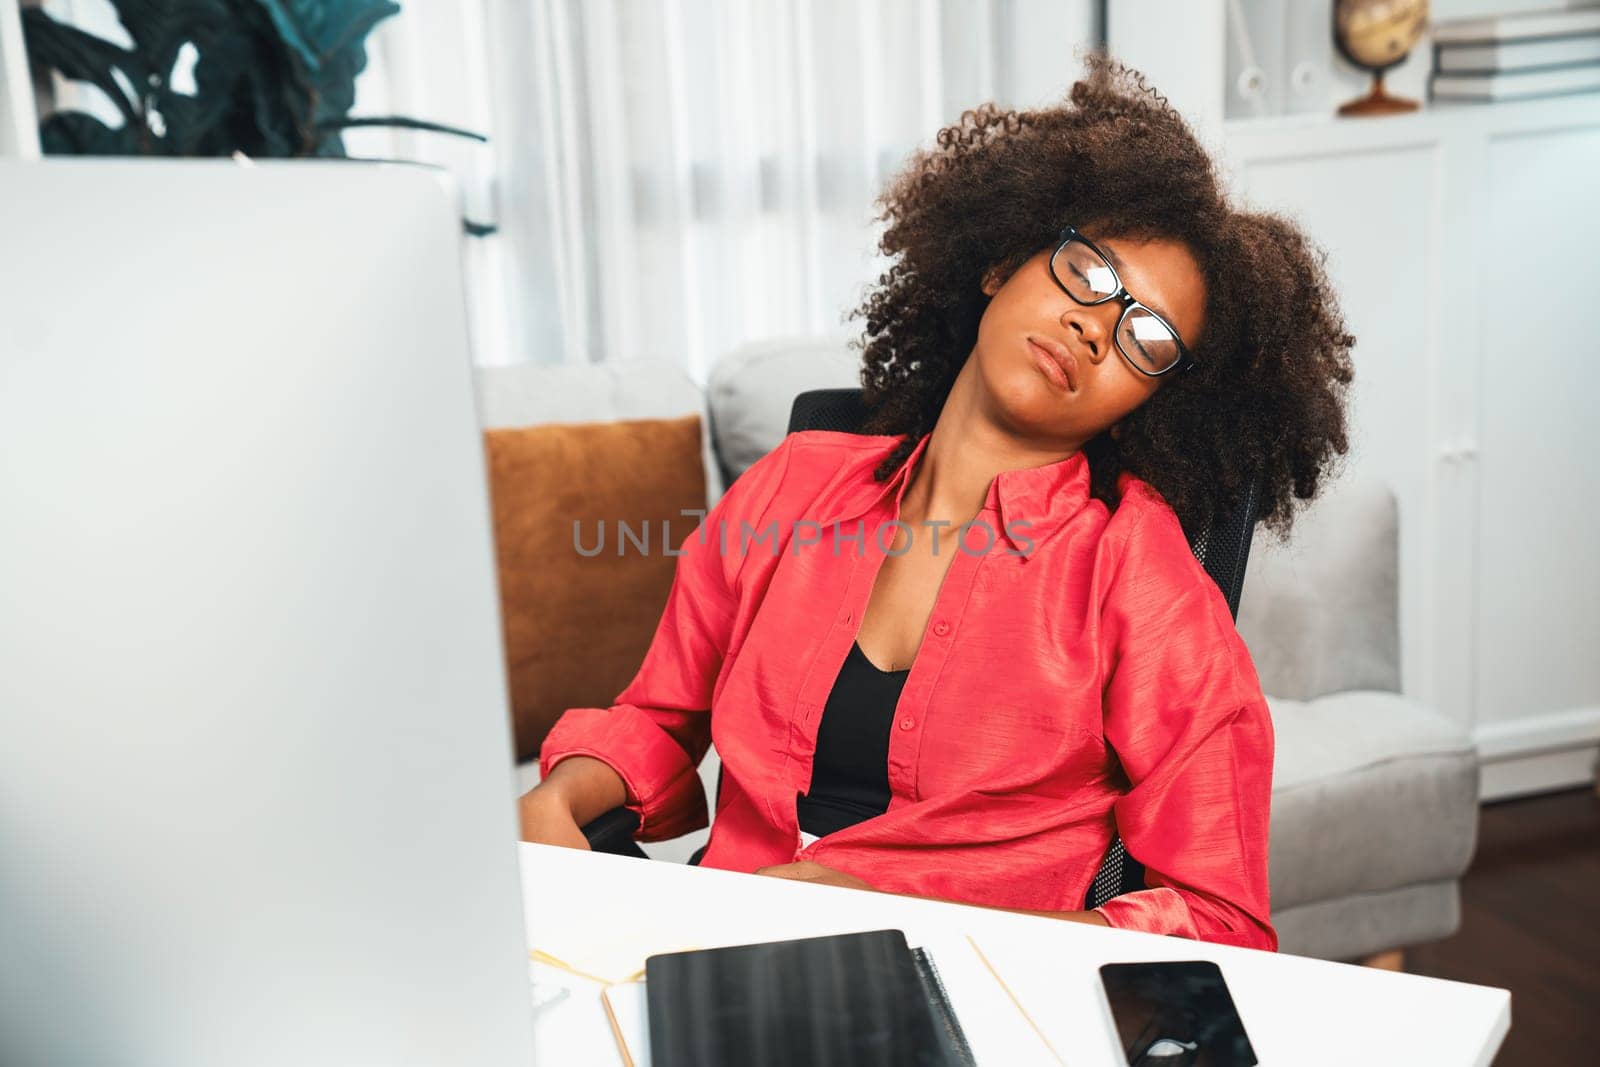 Young African woman taking a nap with dress up colored suit, leaning on office chair at workplace, waring glasses while sleeping. Concept of being exhausted of working project job. Tastemaker.